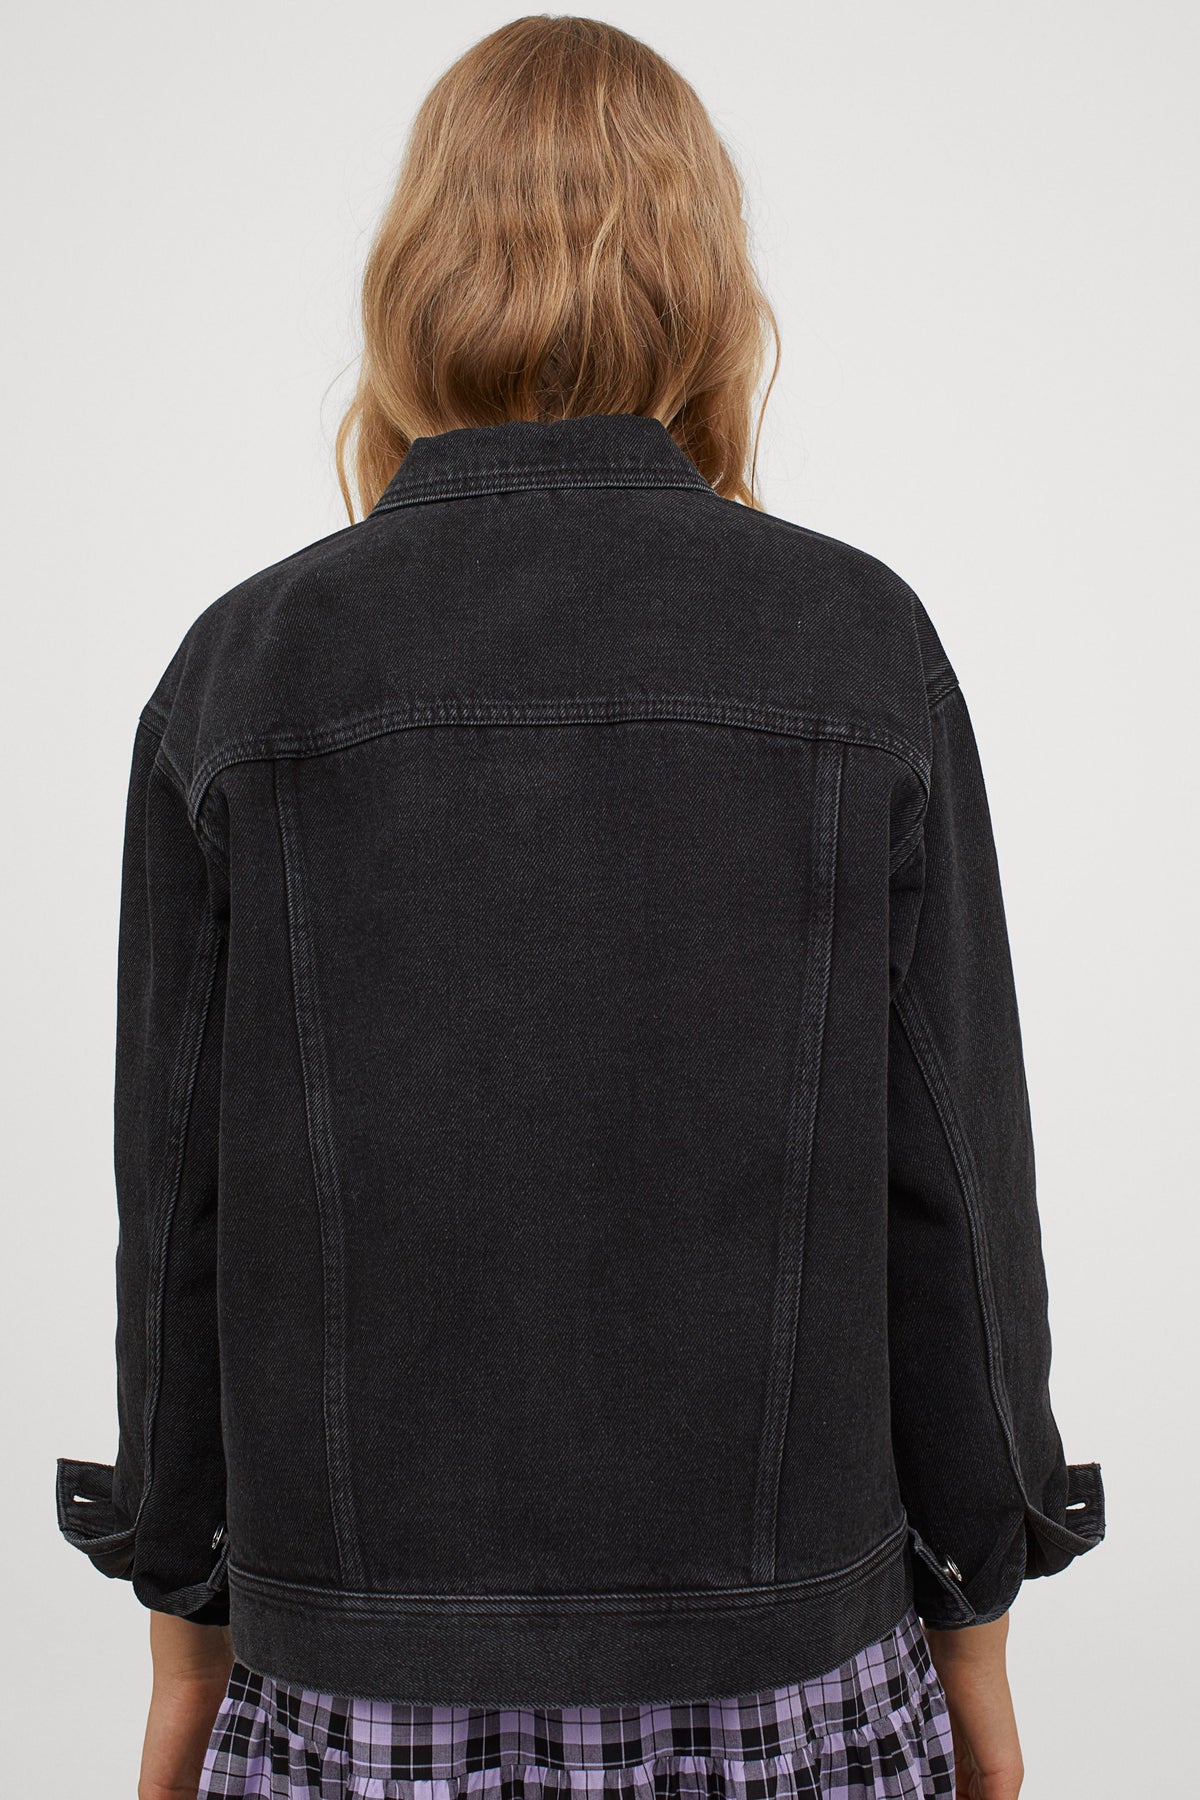 Relaxed fit black denim jacket from Ace Cart, featuring collar, chest pockets, and stone-washed finish.